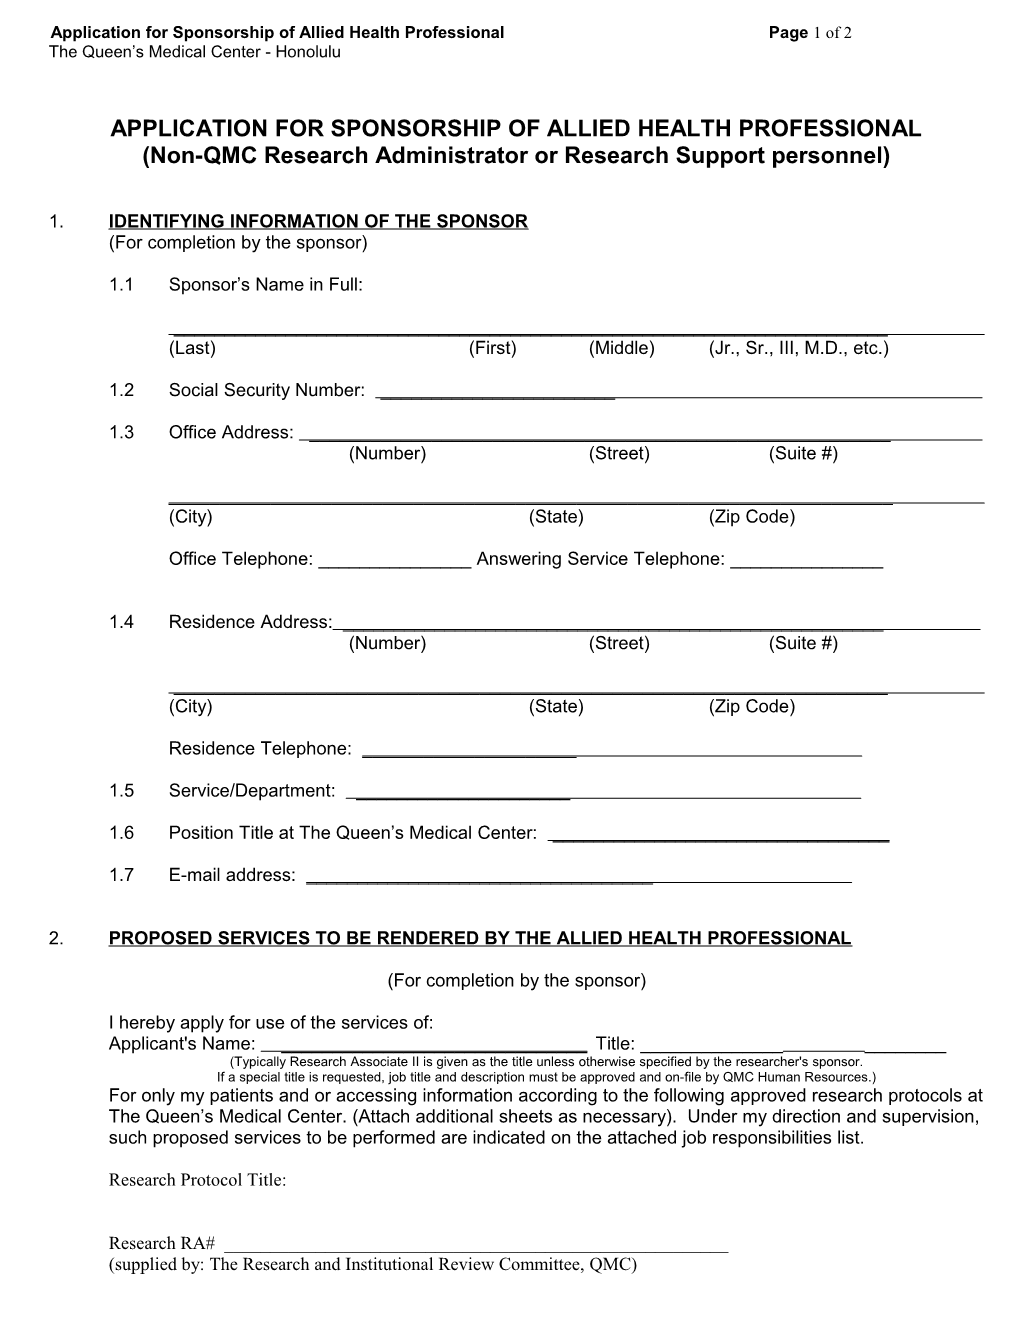 APPLICATION for SPONSORSHIP of ALLIED HEALTH PROFESSIONAL (Research Associate Or Clinical